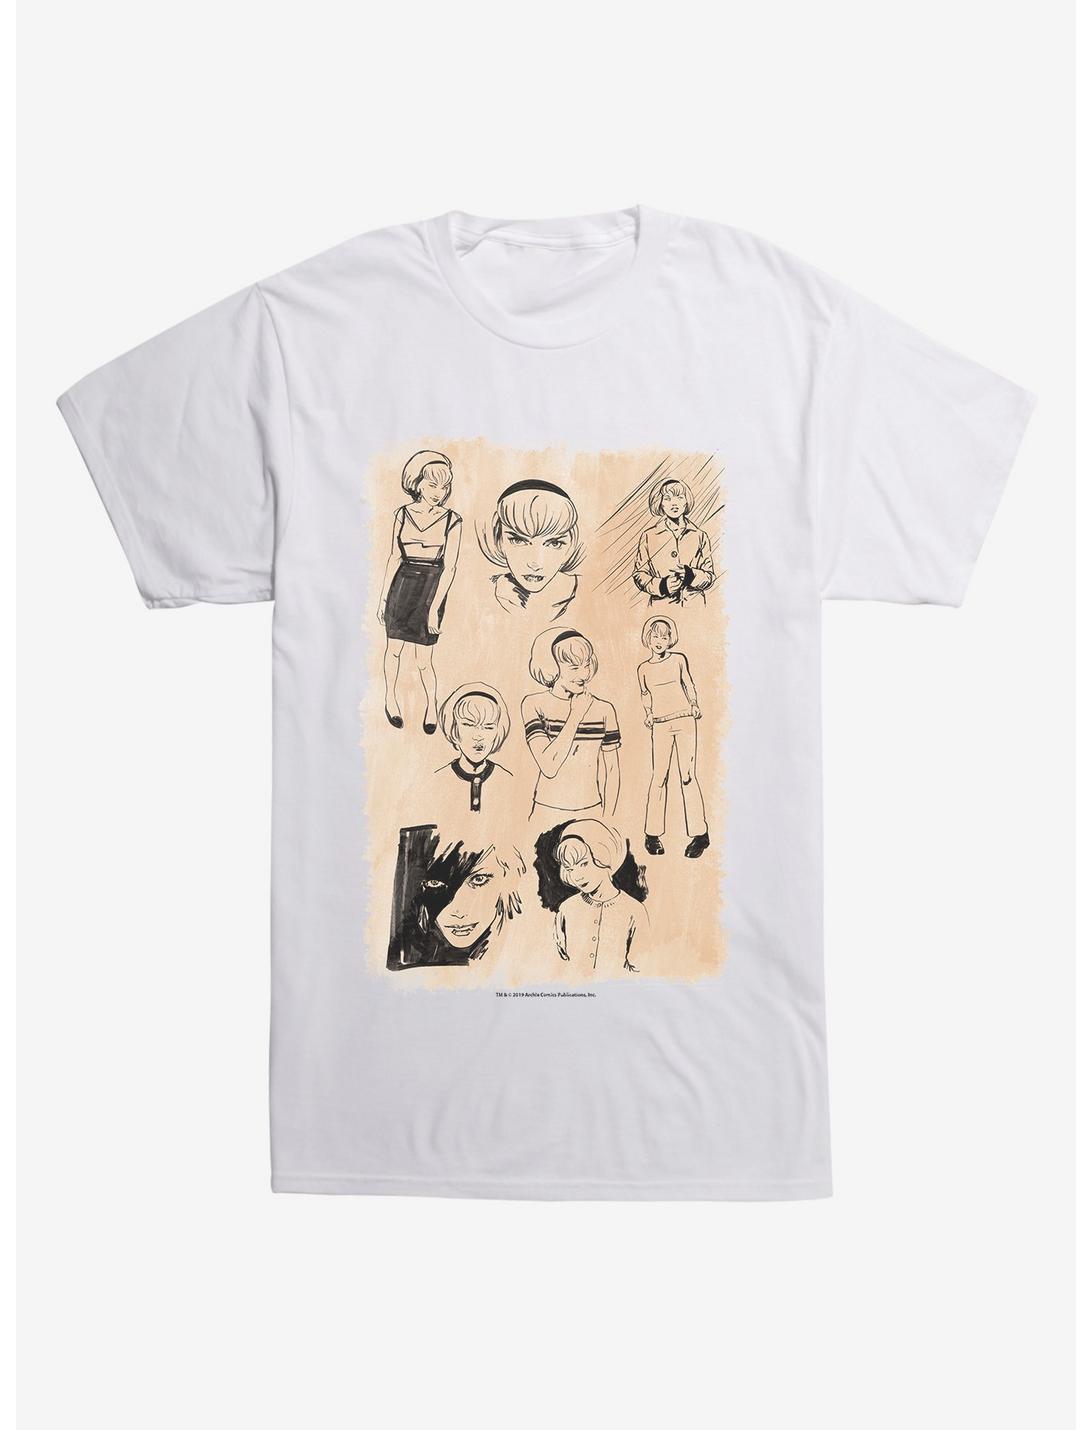 Chilling Adventures Of Sabrina Sketches White T-Shirt, WHITE, hi-res